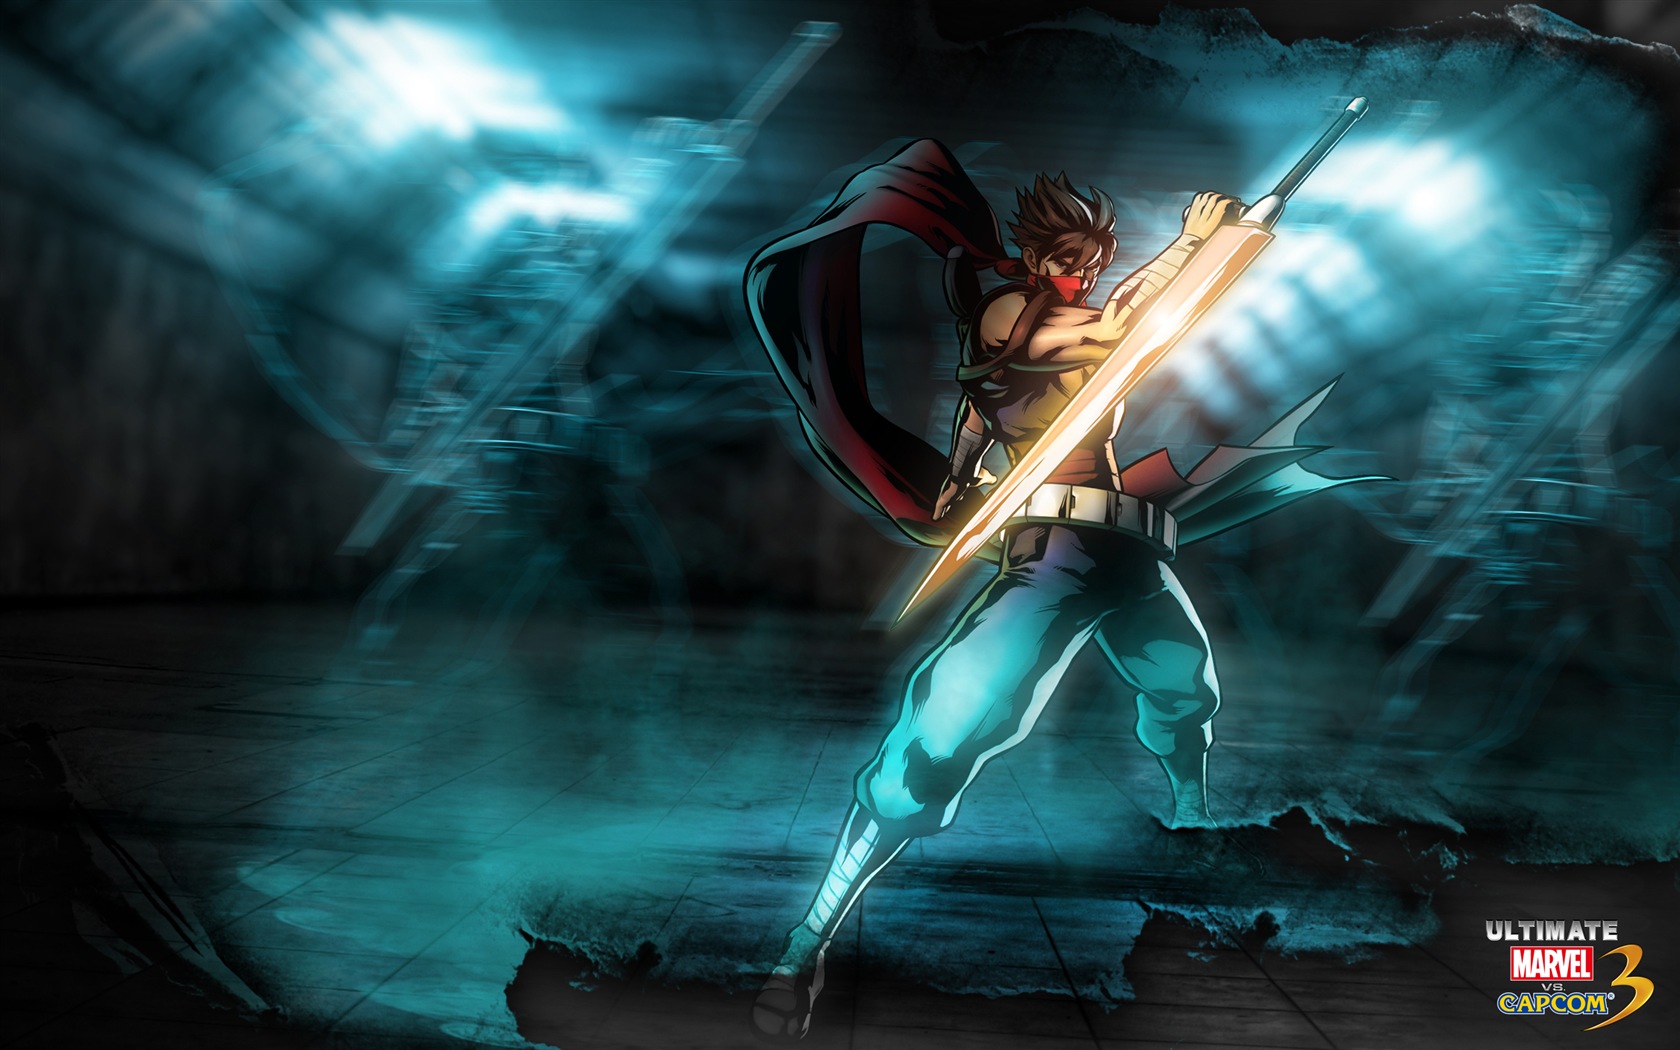 Marvel VS. Capcom 3: Fate of Two Worlds HD game wallpapers #23 - 1680x1050